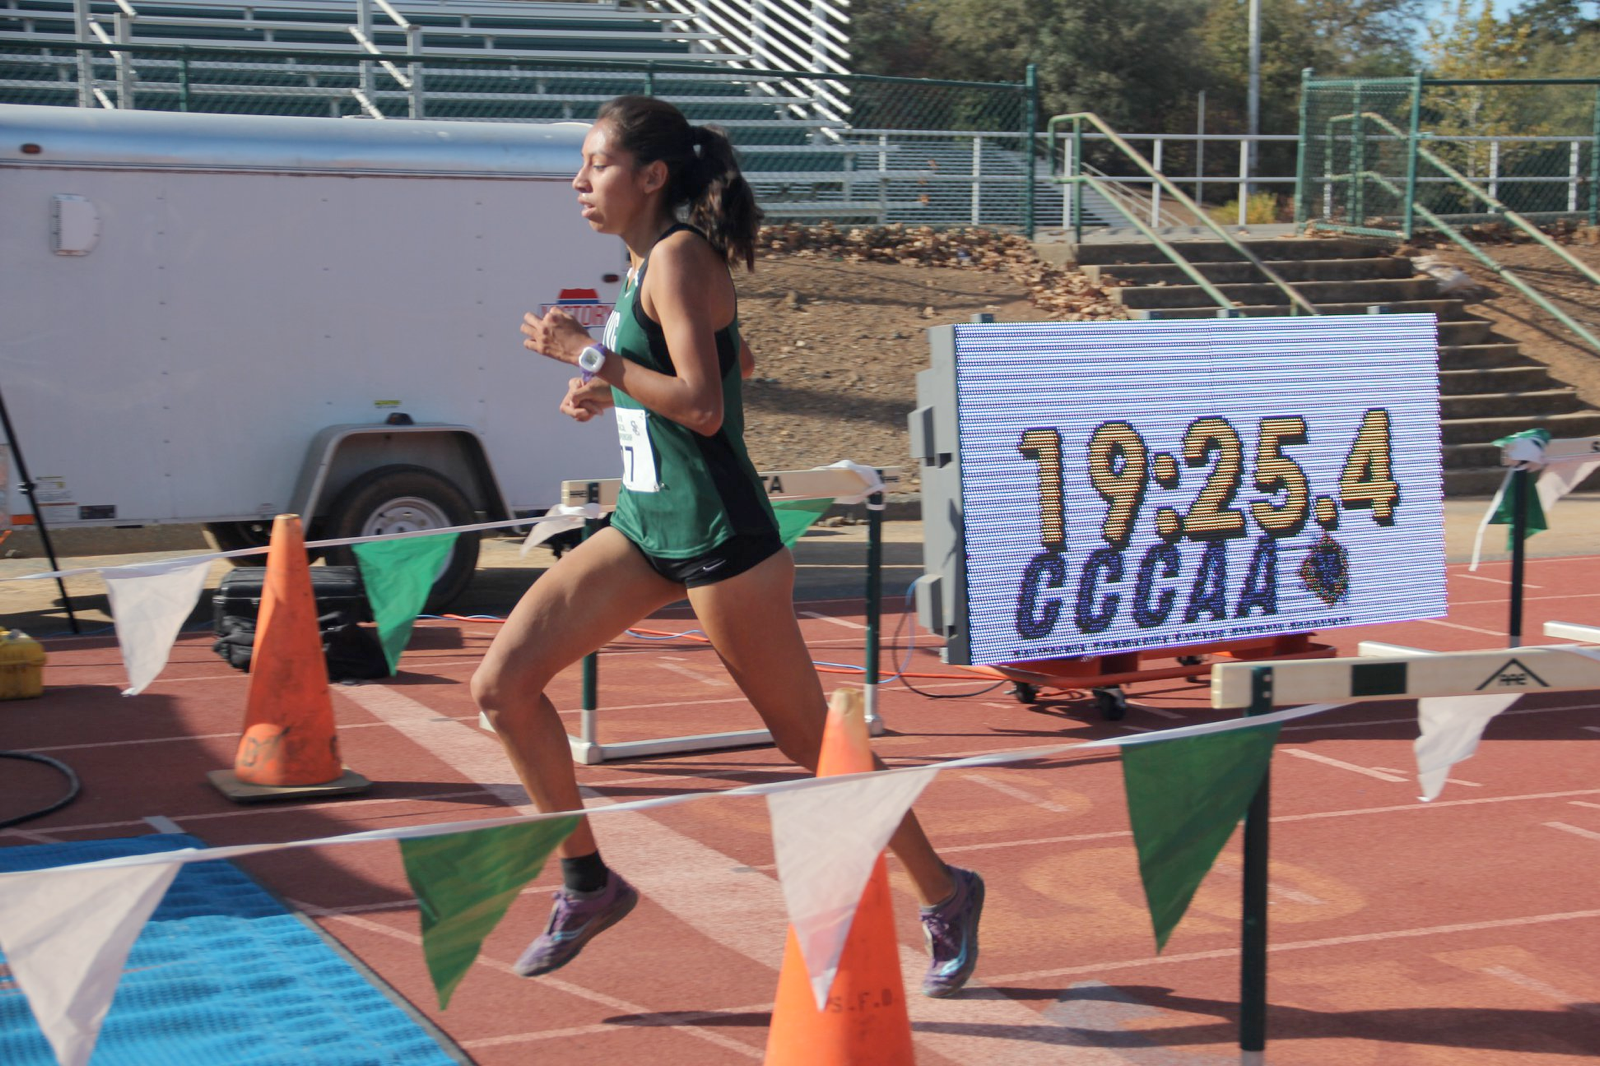 Julia Gonzalez wins NorCal Title, Men finish in 7th, all advance to state